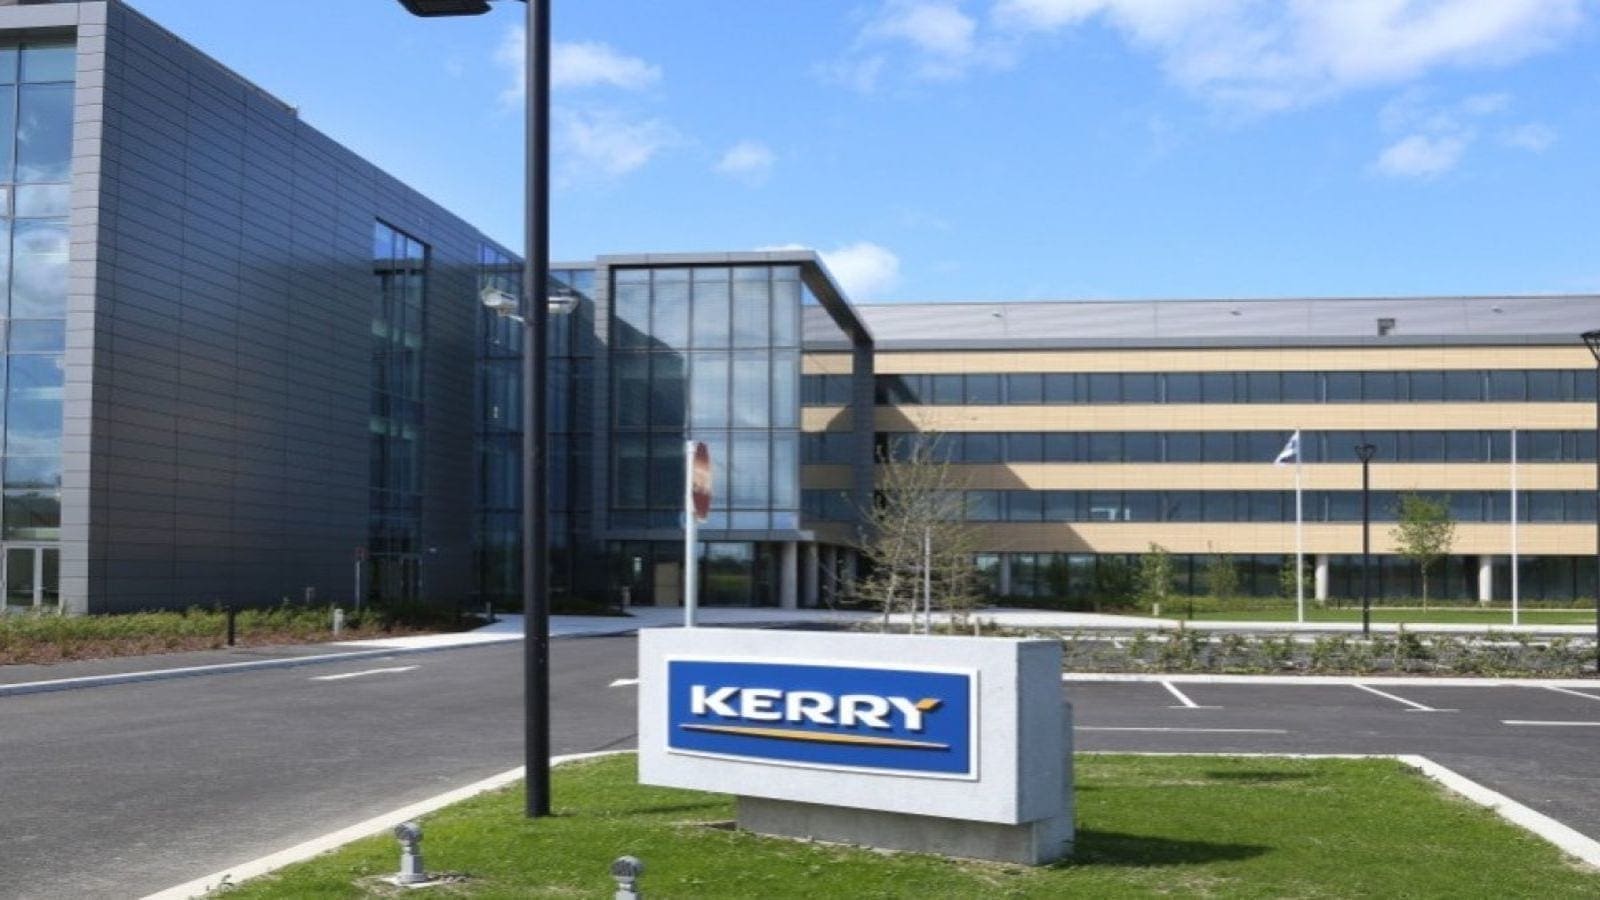 <strong>Taste & nutrition expert Kerry offloads sweet ingredients portfolio to IRCA for US$538M</strong>